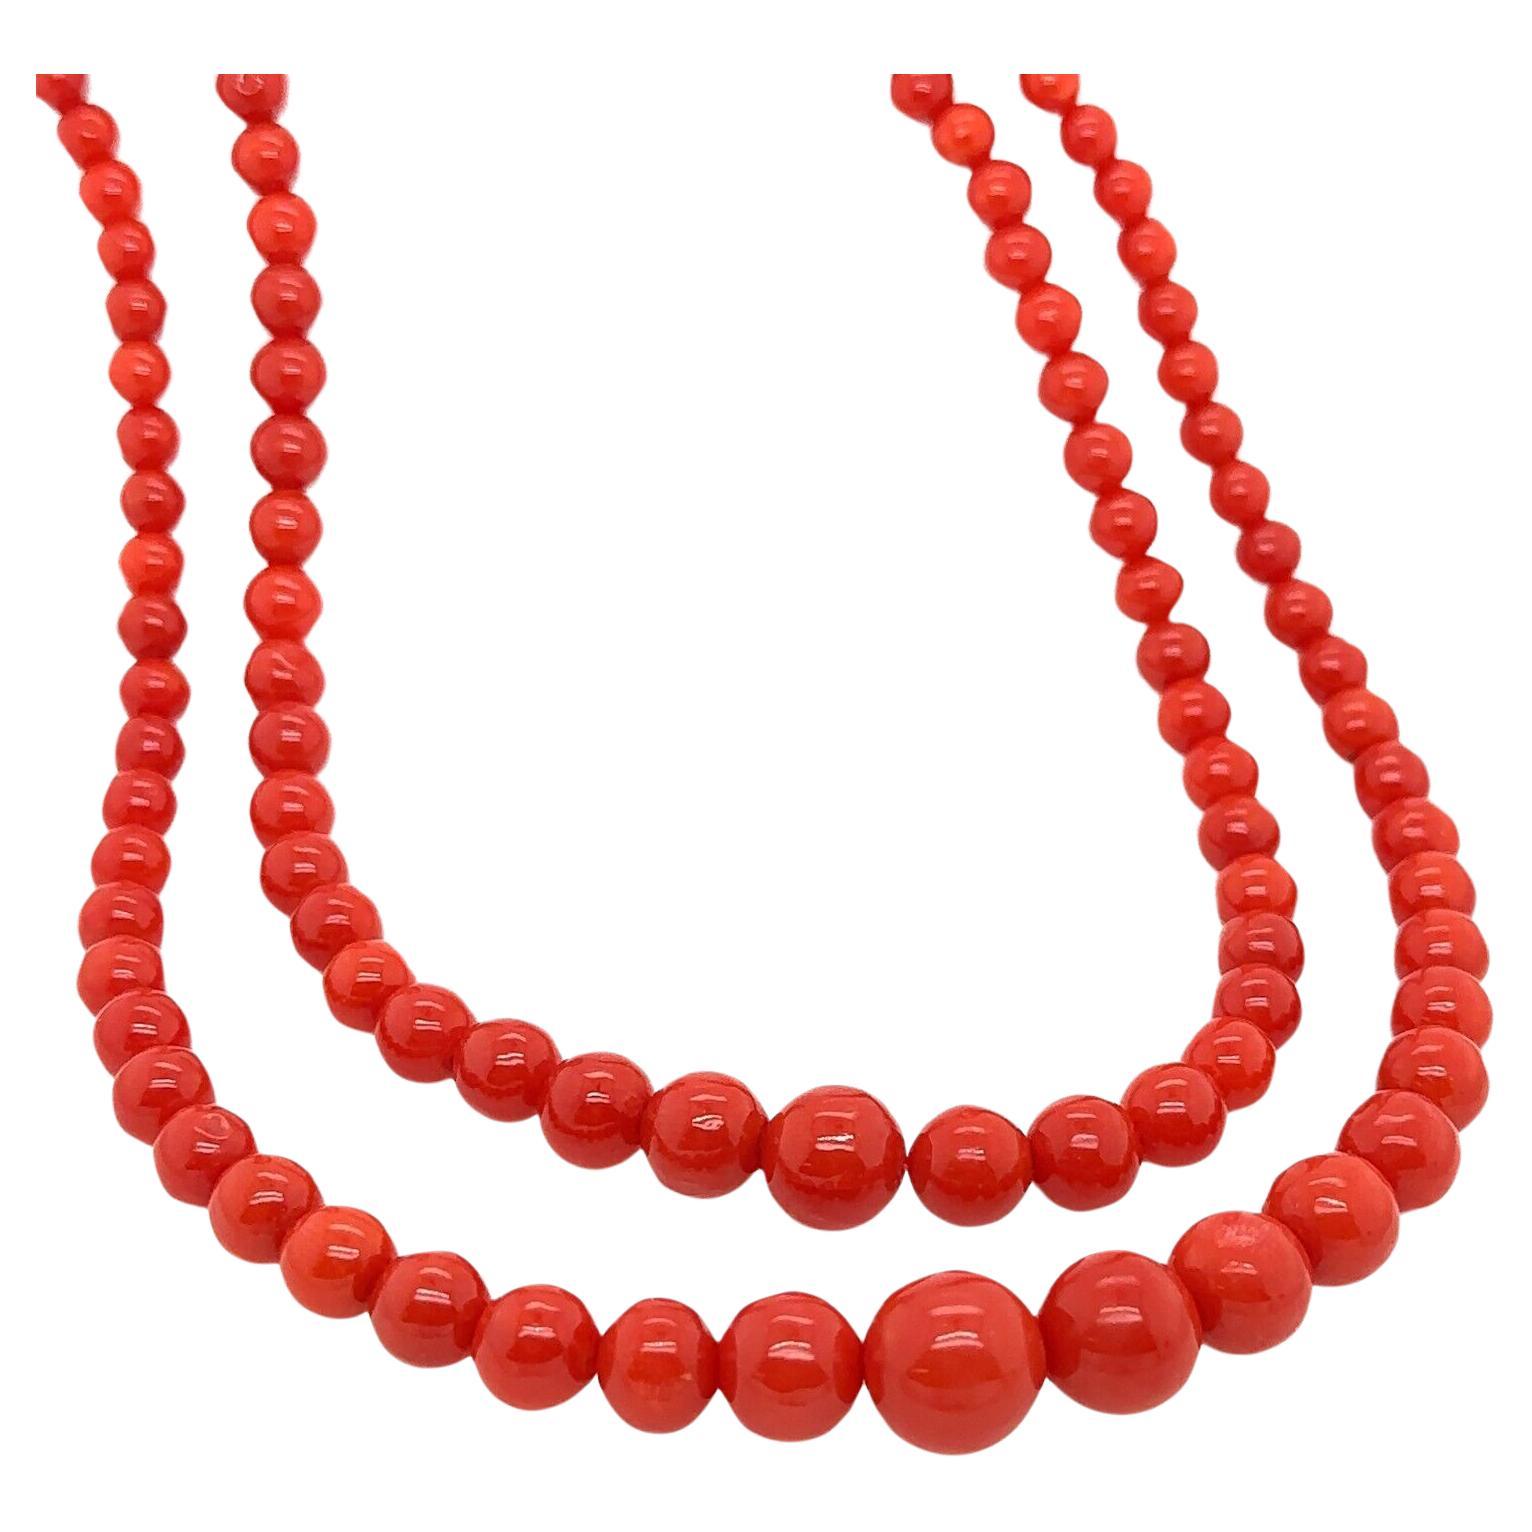 This unique necklace features a 14ct Gold clasp that adds a touch of opulence and luxury, perfectly complementing the warmth and charm of the magnificent red Coral. The undeniable vintage appeal of this remarkable necklace adds an air of